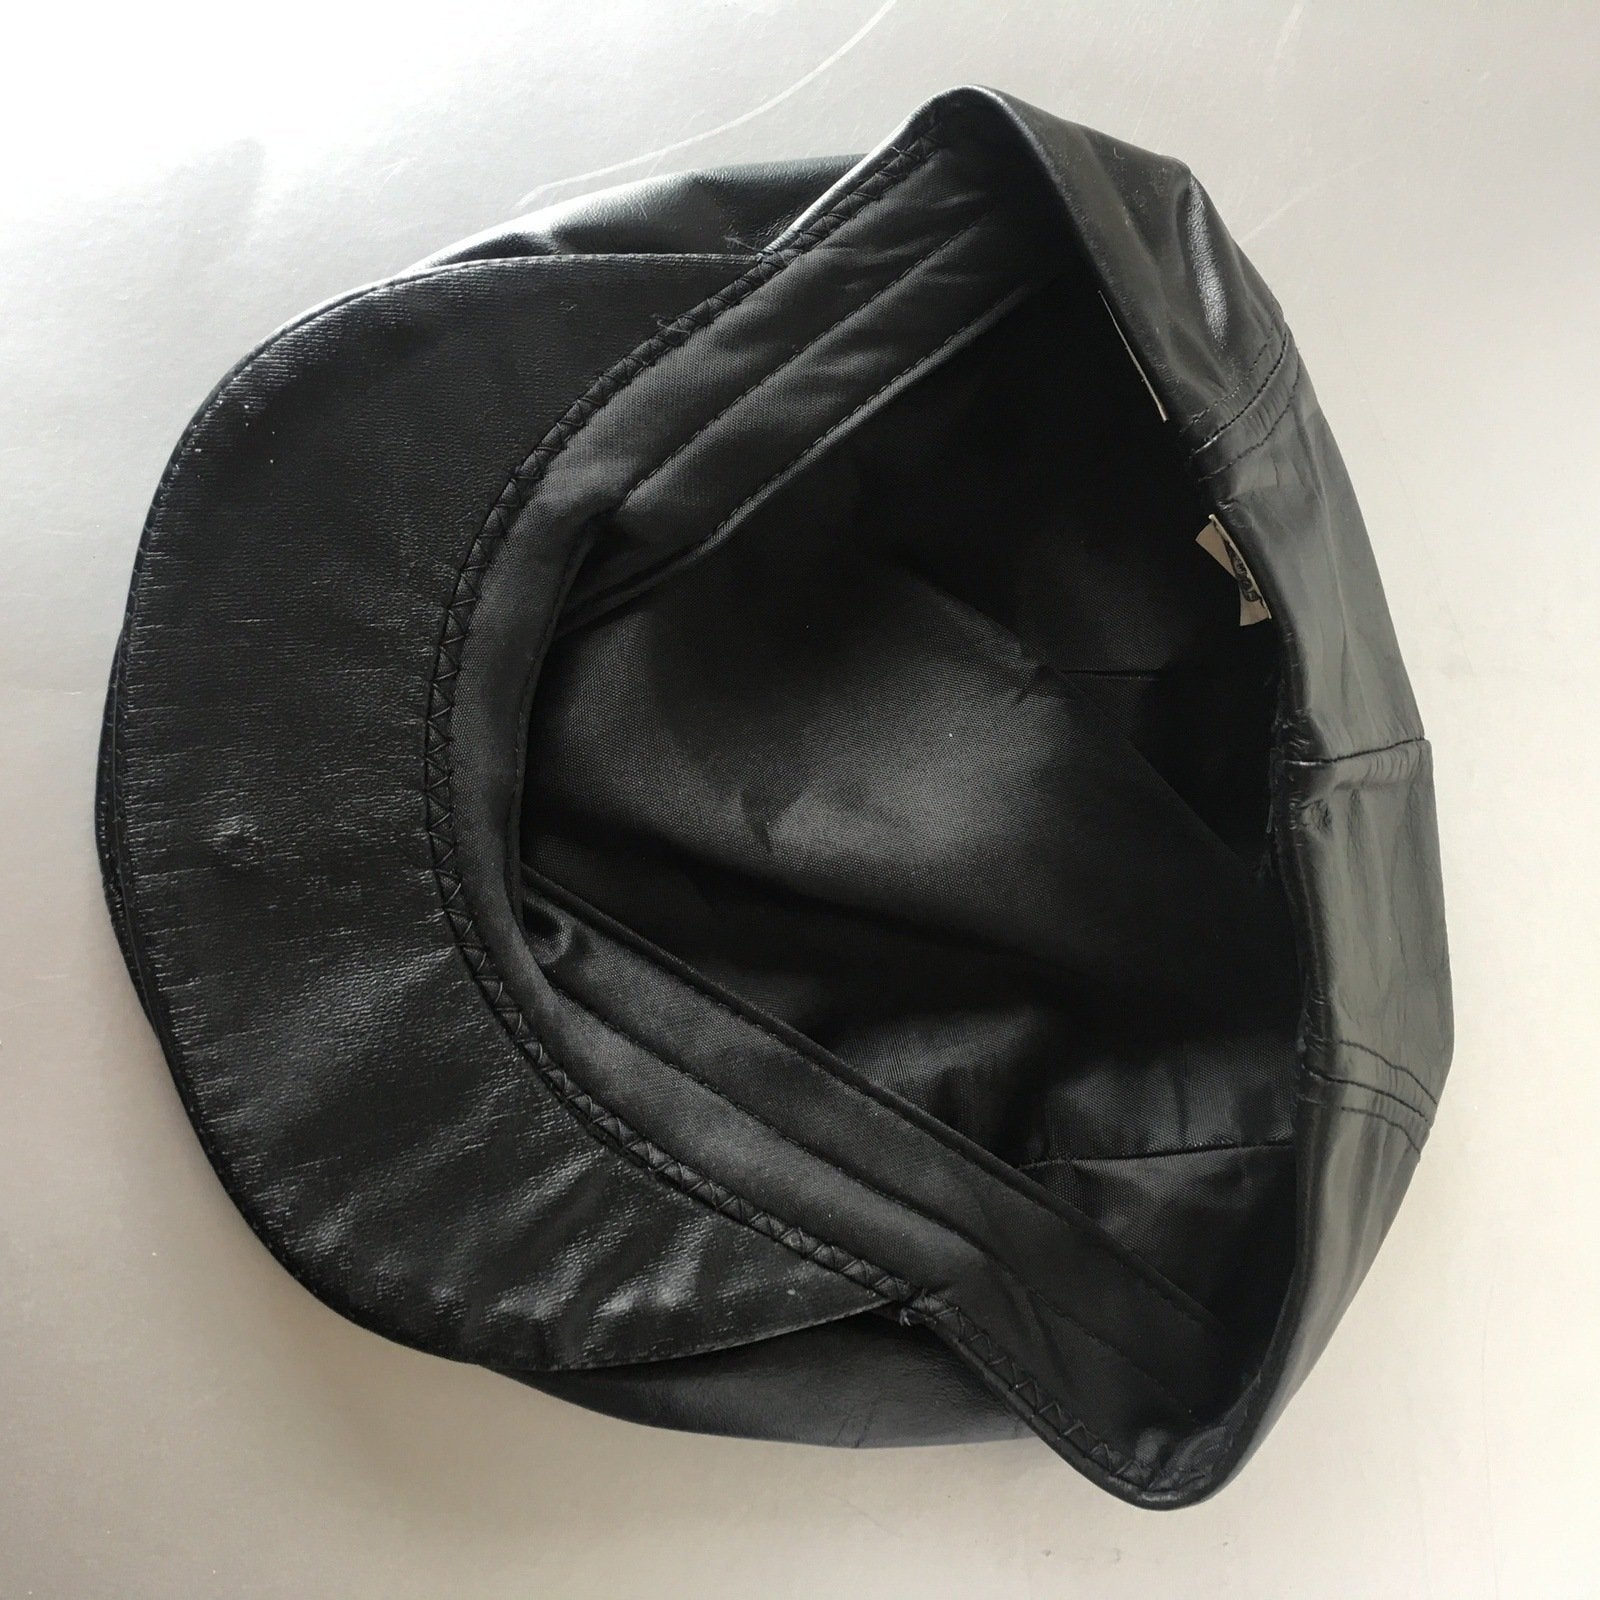 United Hatters Caps Black Leather Newsboy Hat Vintage Accessories